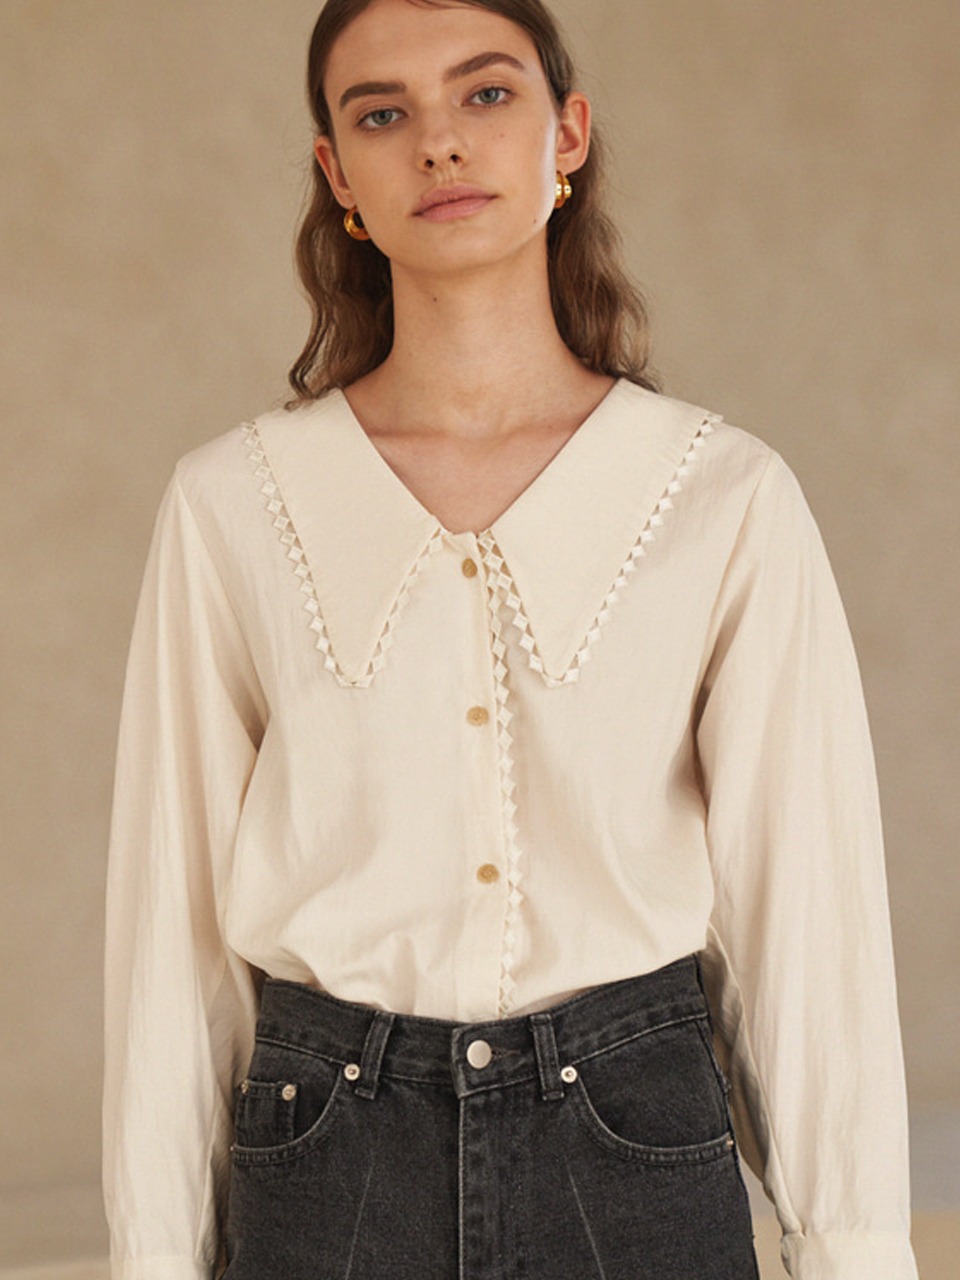 Lace collar blouse in ivory